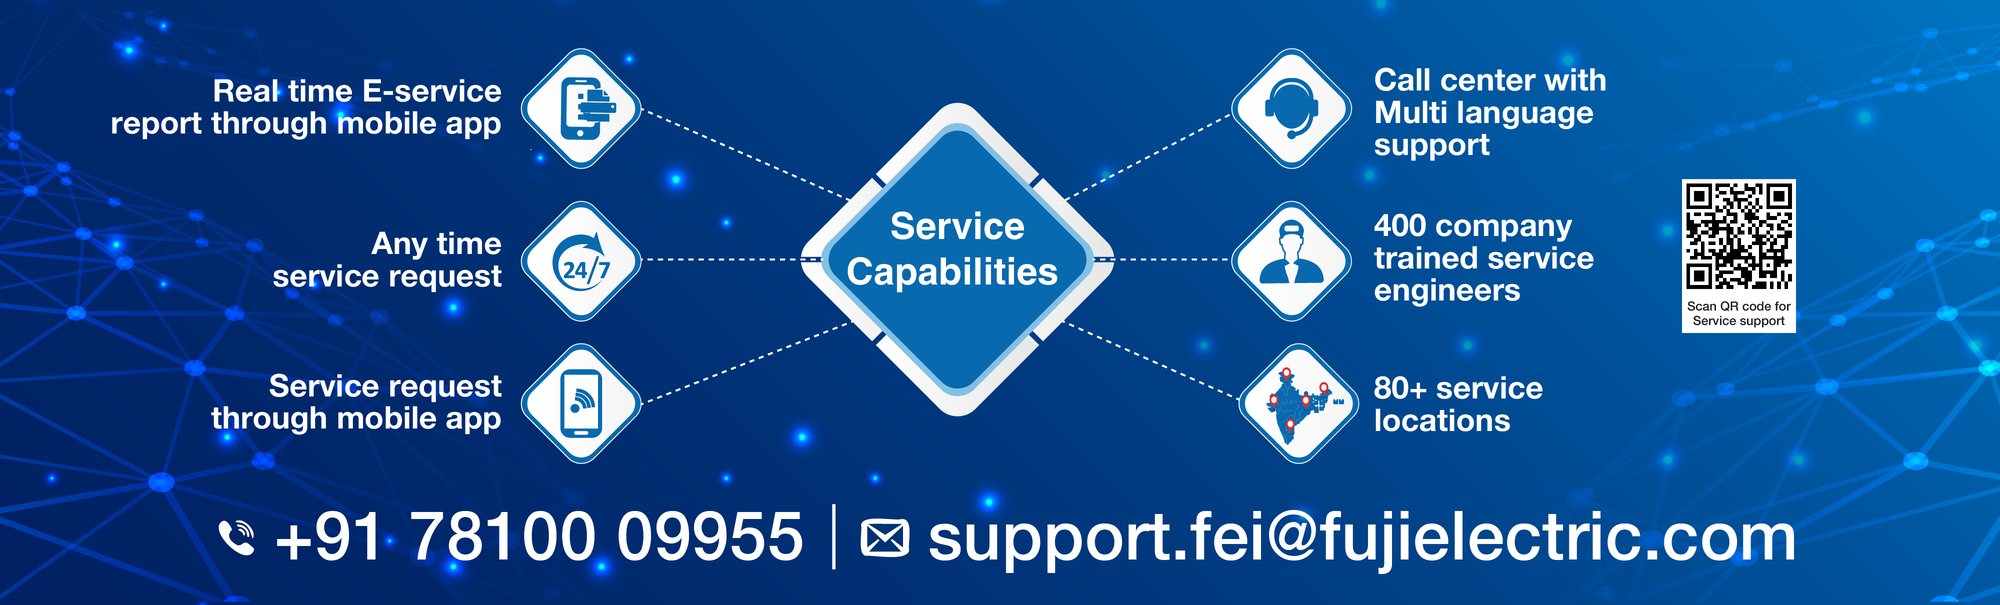 Service support Web Banner W 1920px  X H 581px